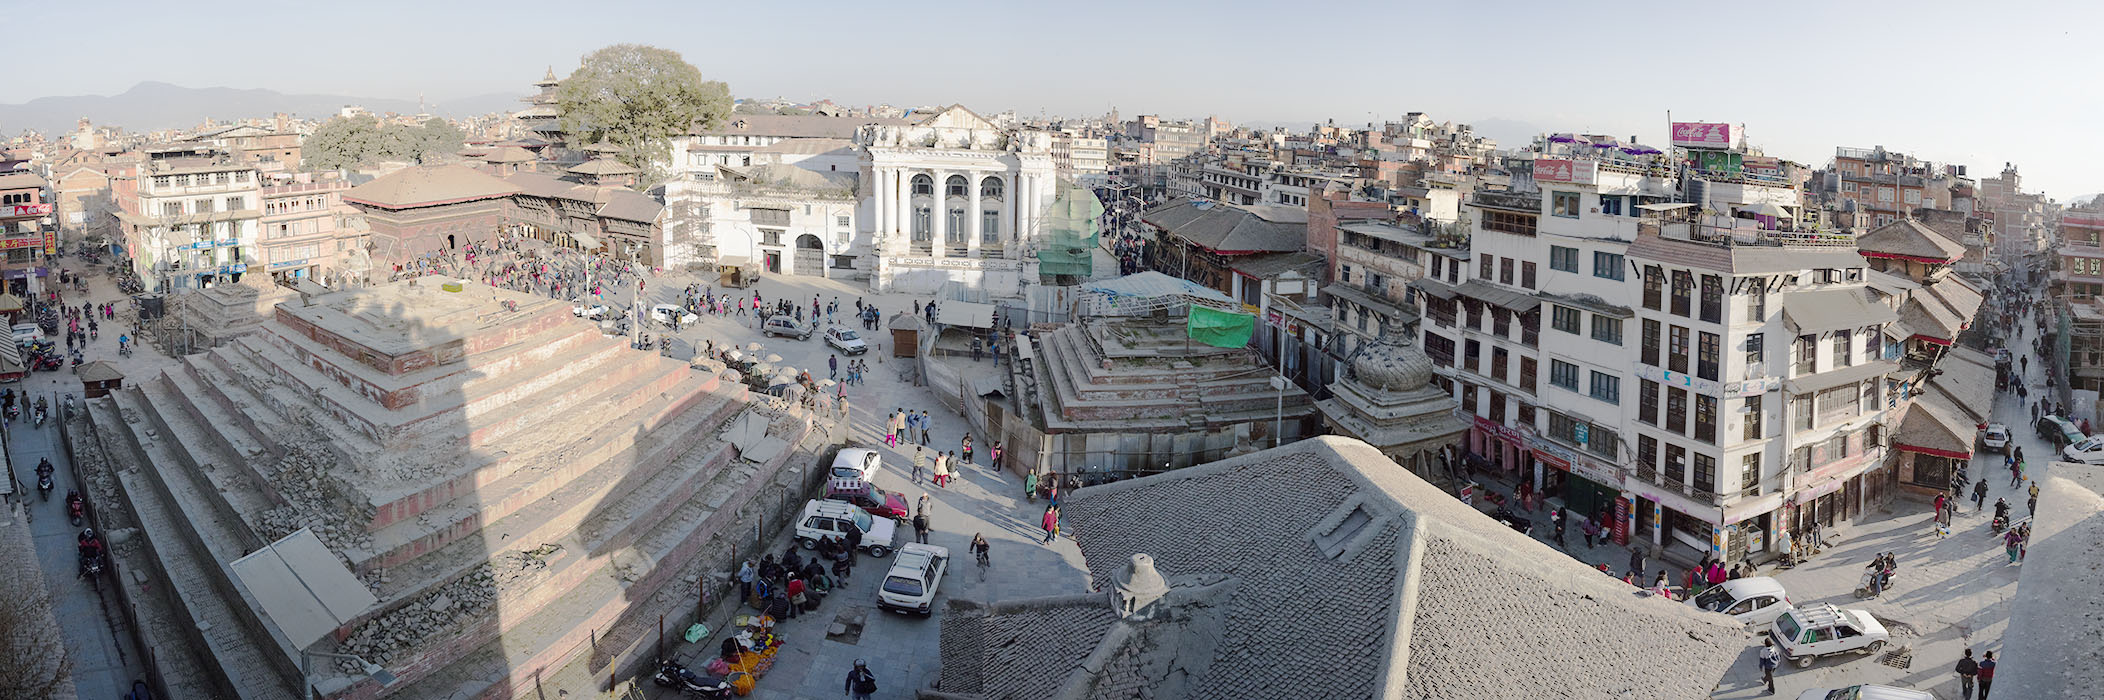 Very Wide Panorama of Traditional Nepali City Center with Vibrant Daily Life and Earthquake Damage.